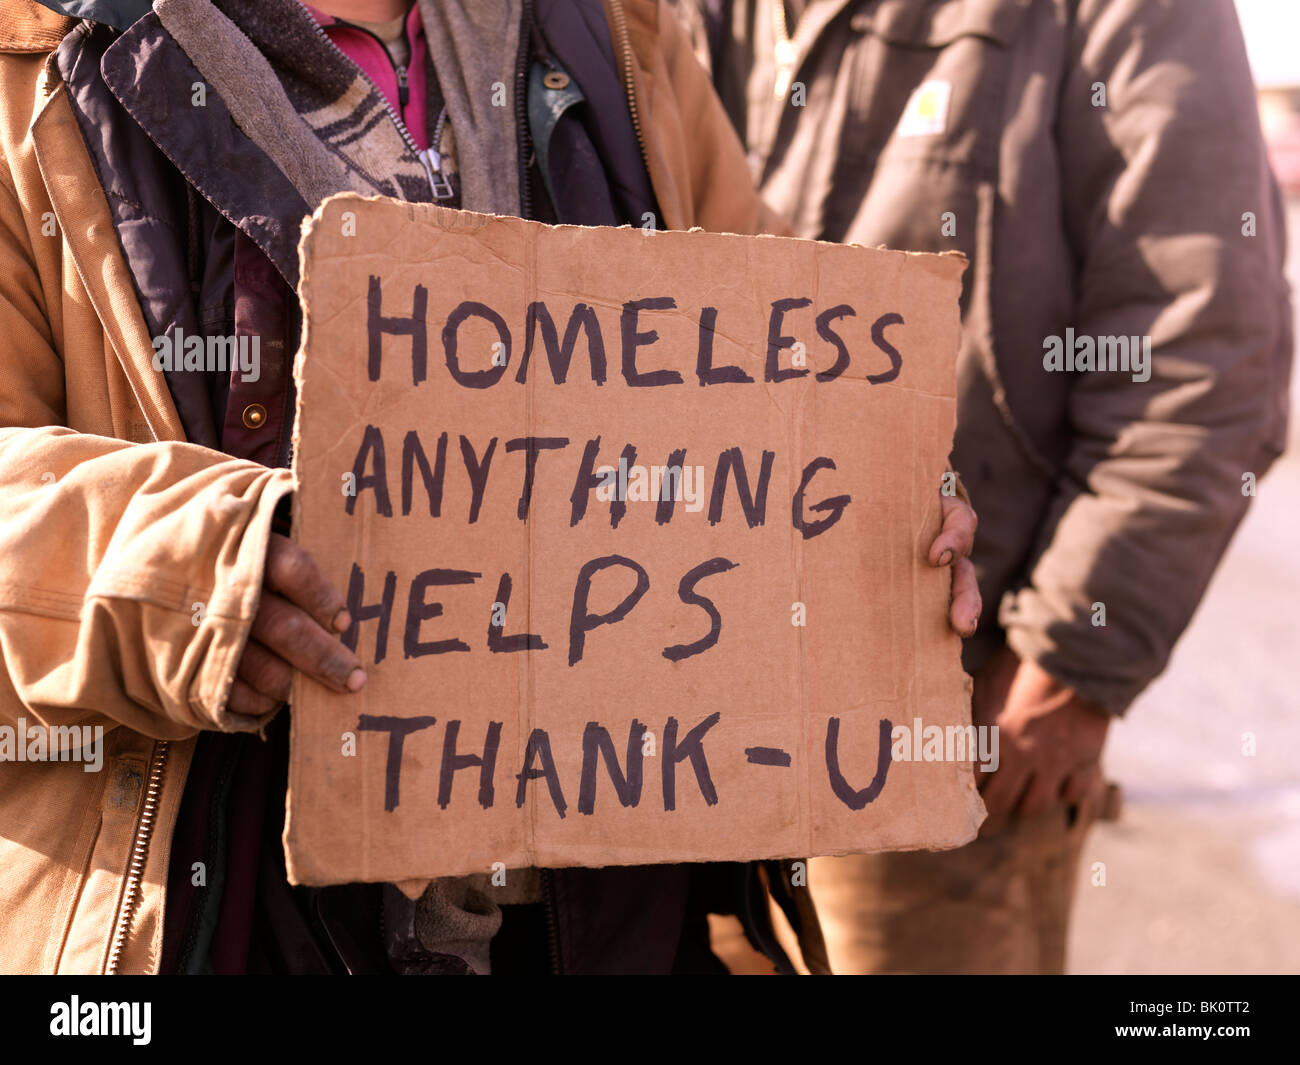 homeless-persons-holding-sign-asking-for-help-and-handouts-unemployed-BK0TT2.jpg